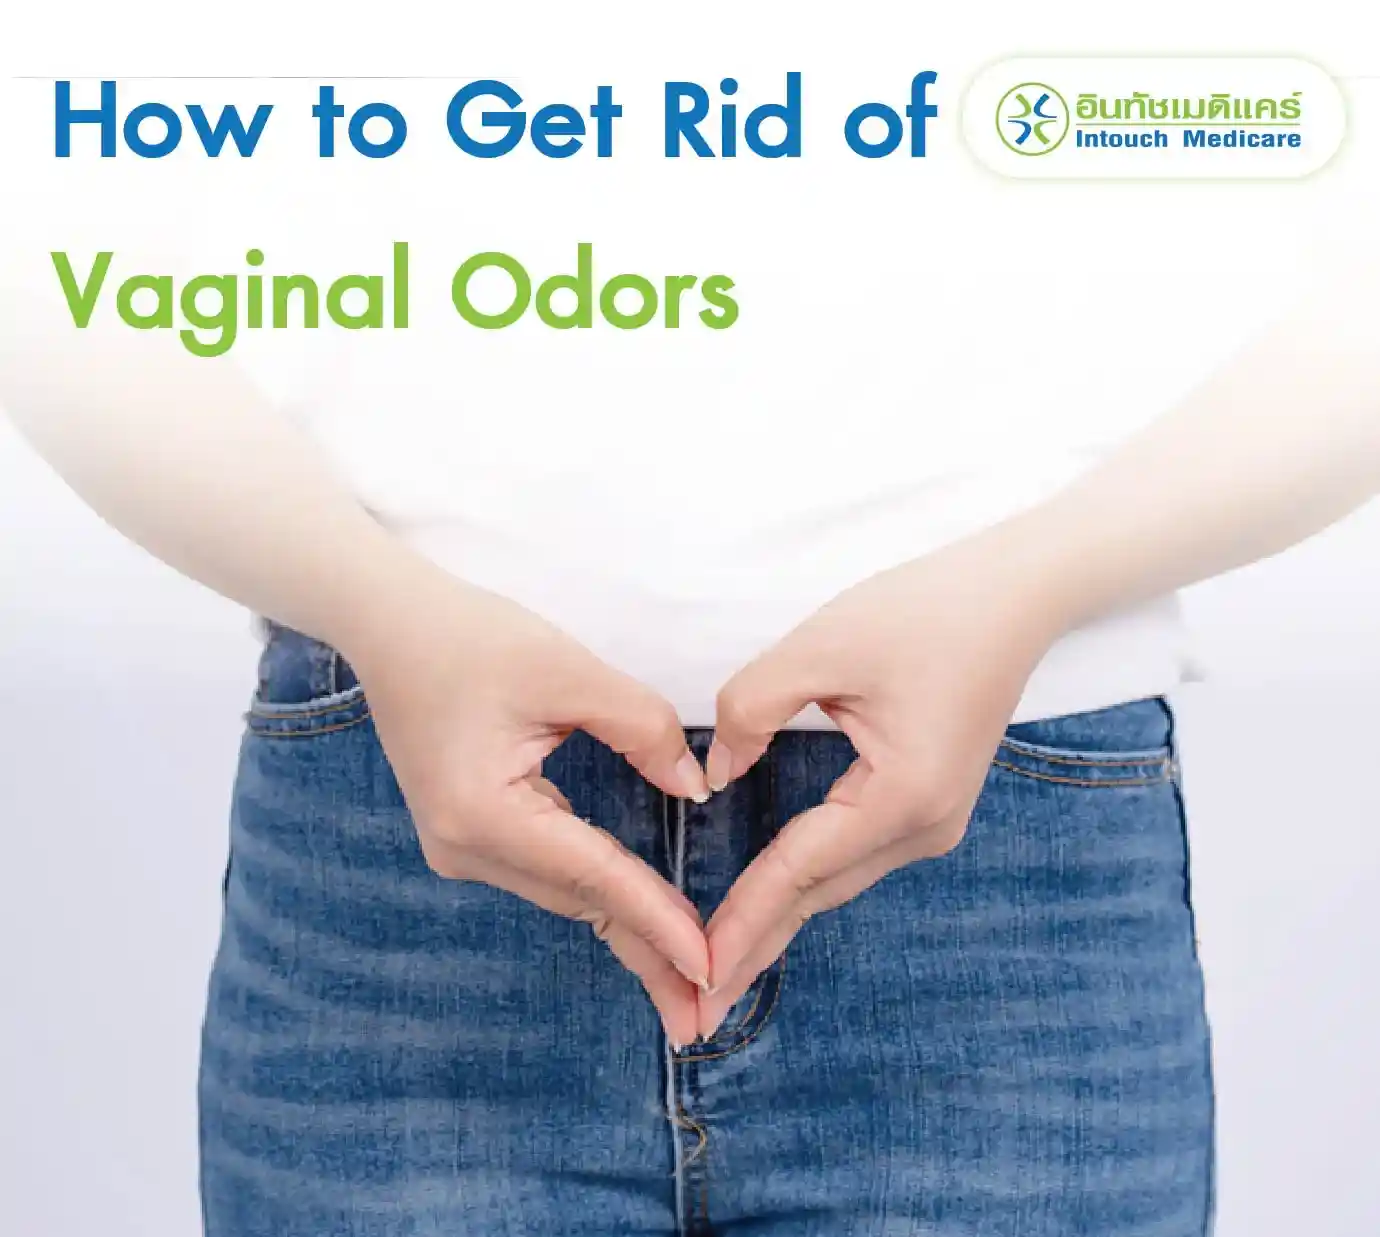 How to Get Rid of Vaginal Odors